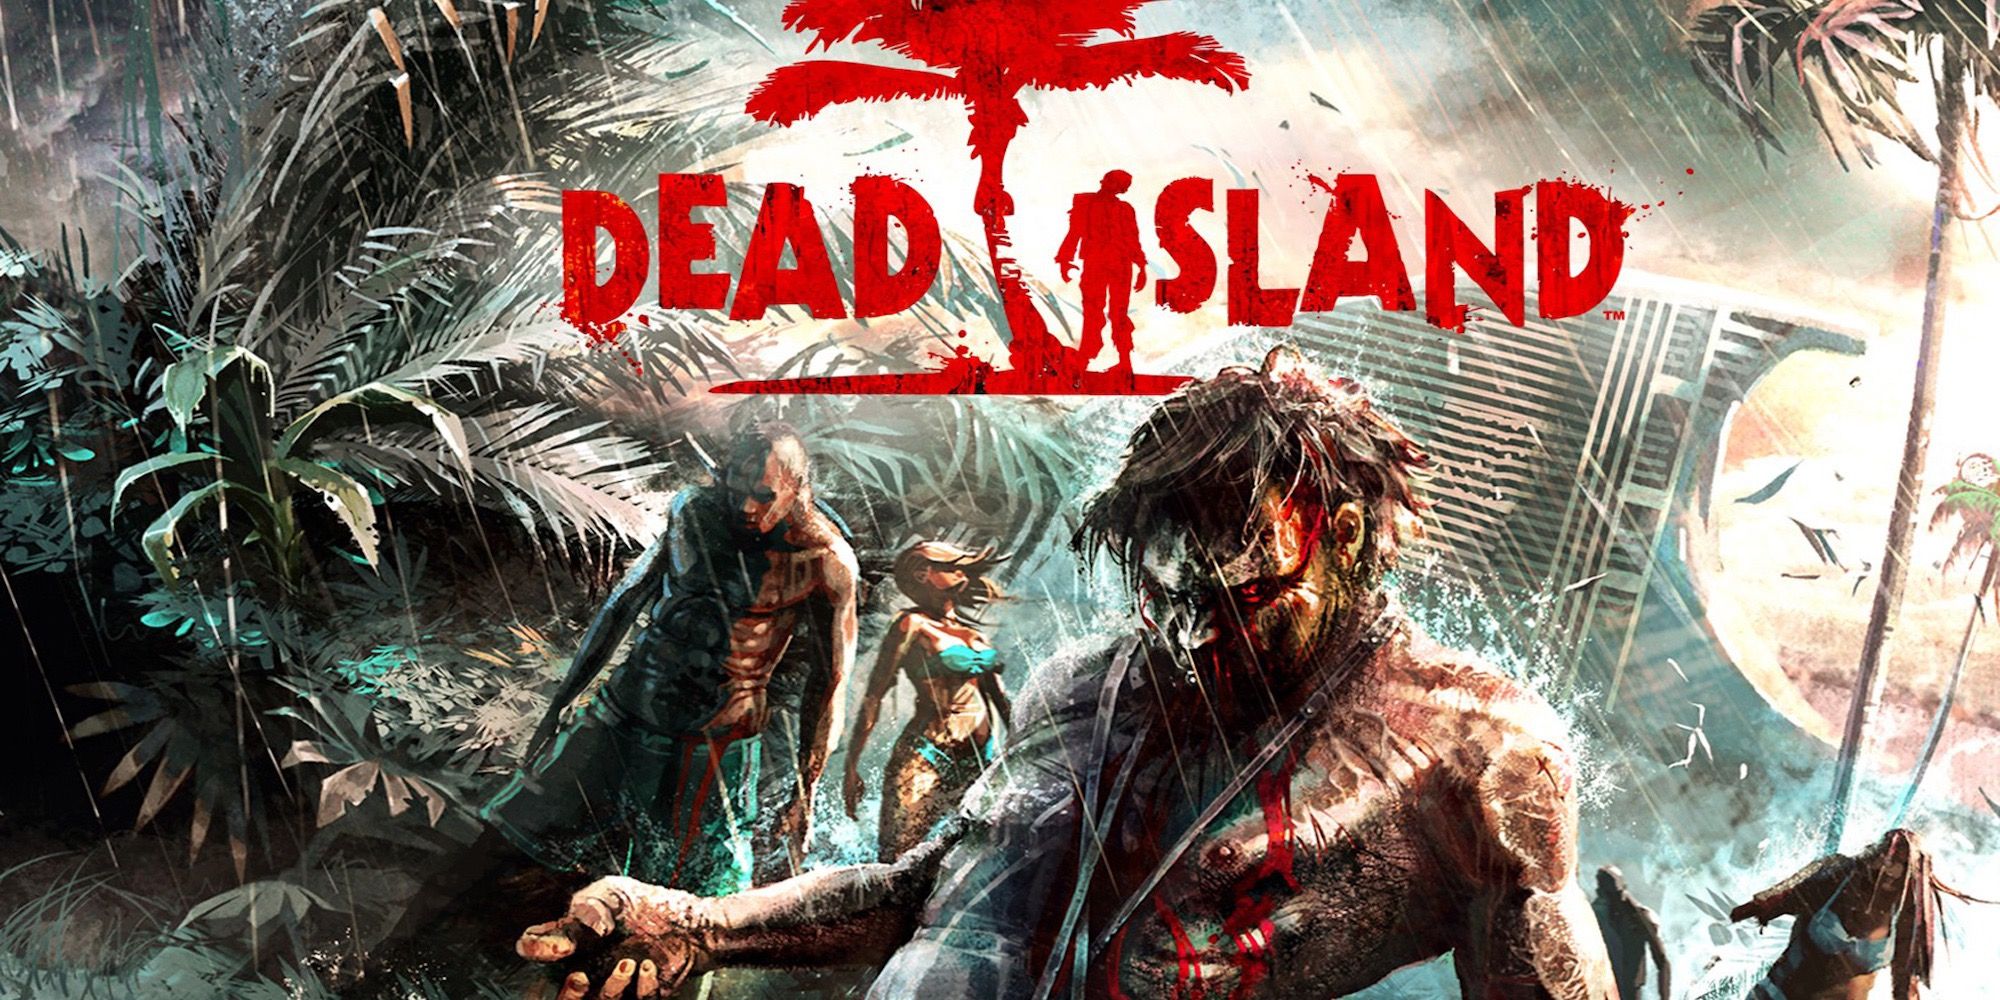 Promo art featuring characters in Dead Island